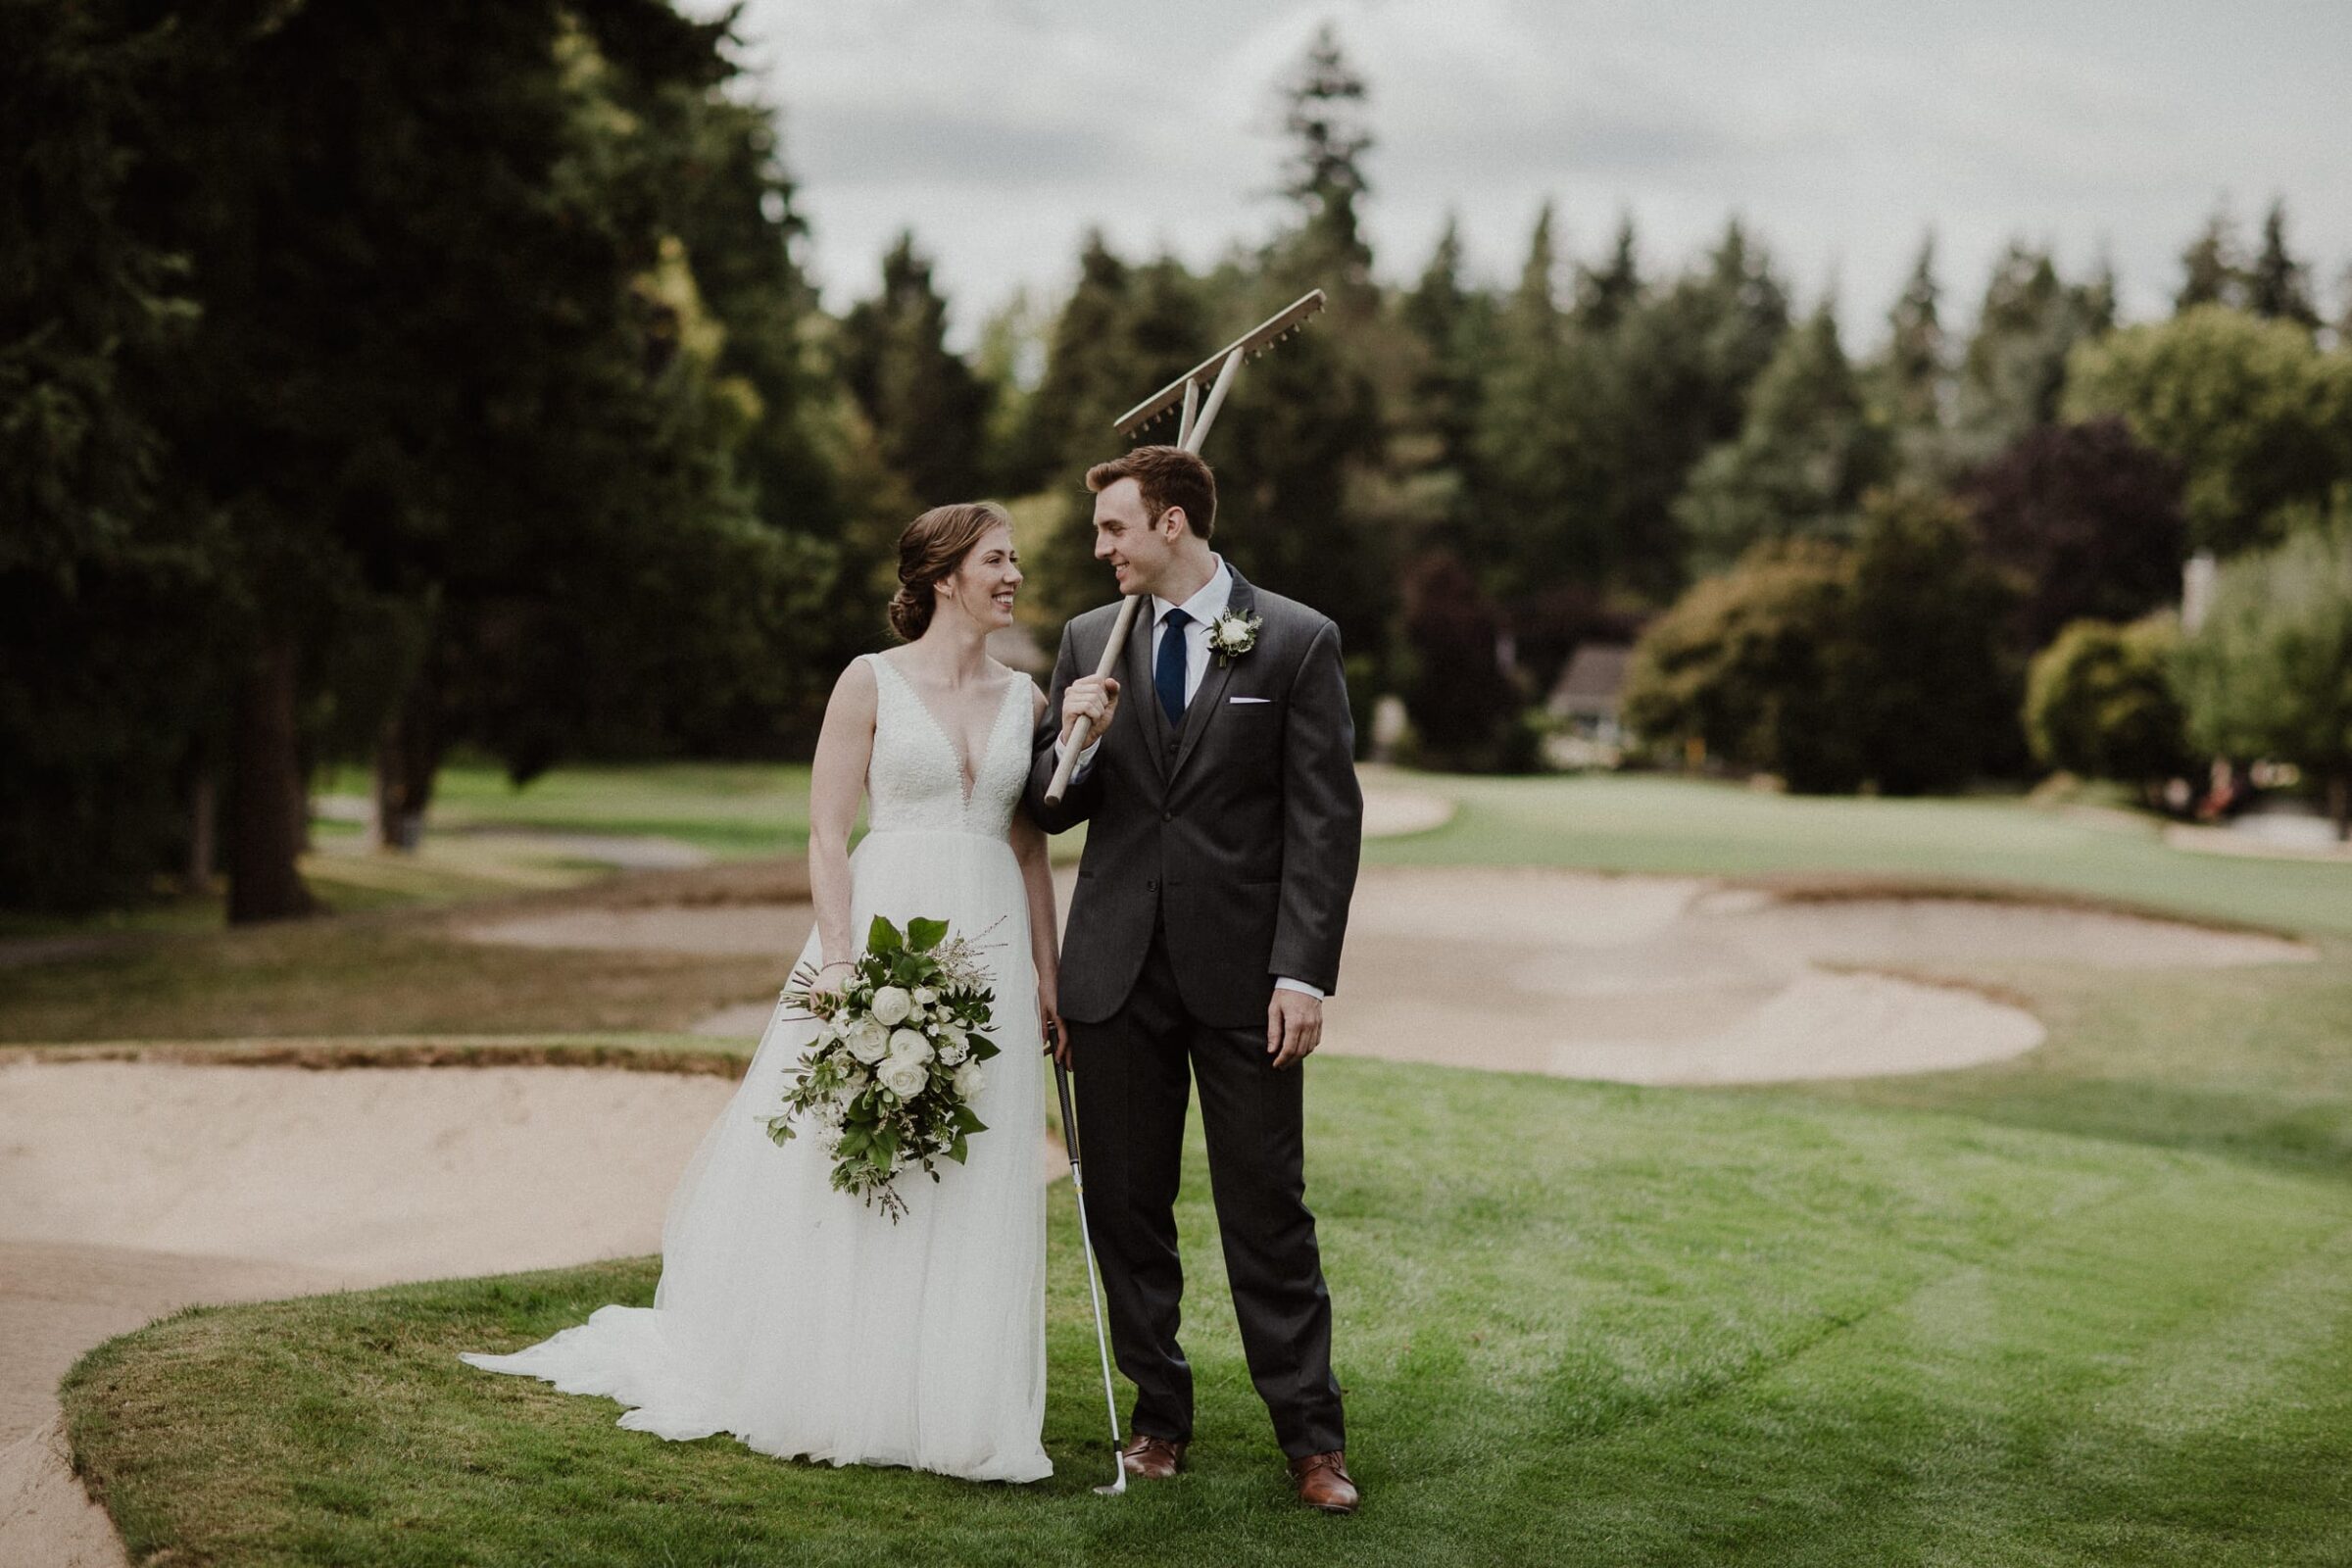 Wedding couple smiling on golf course in Seattle.